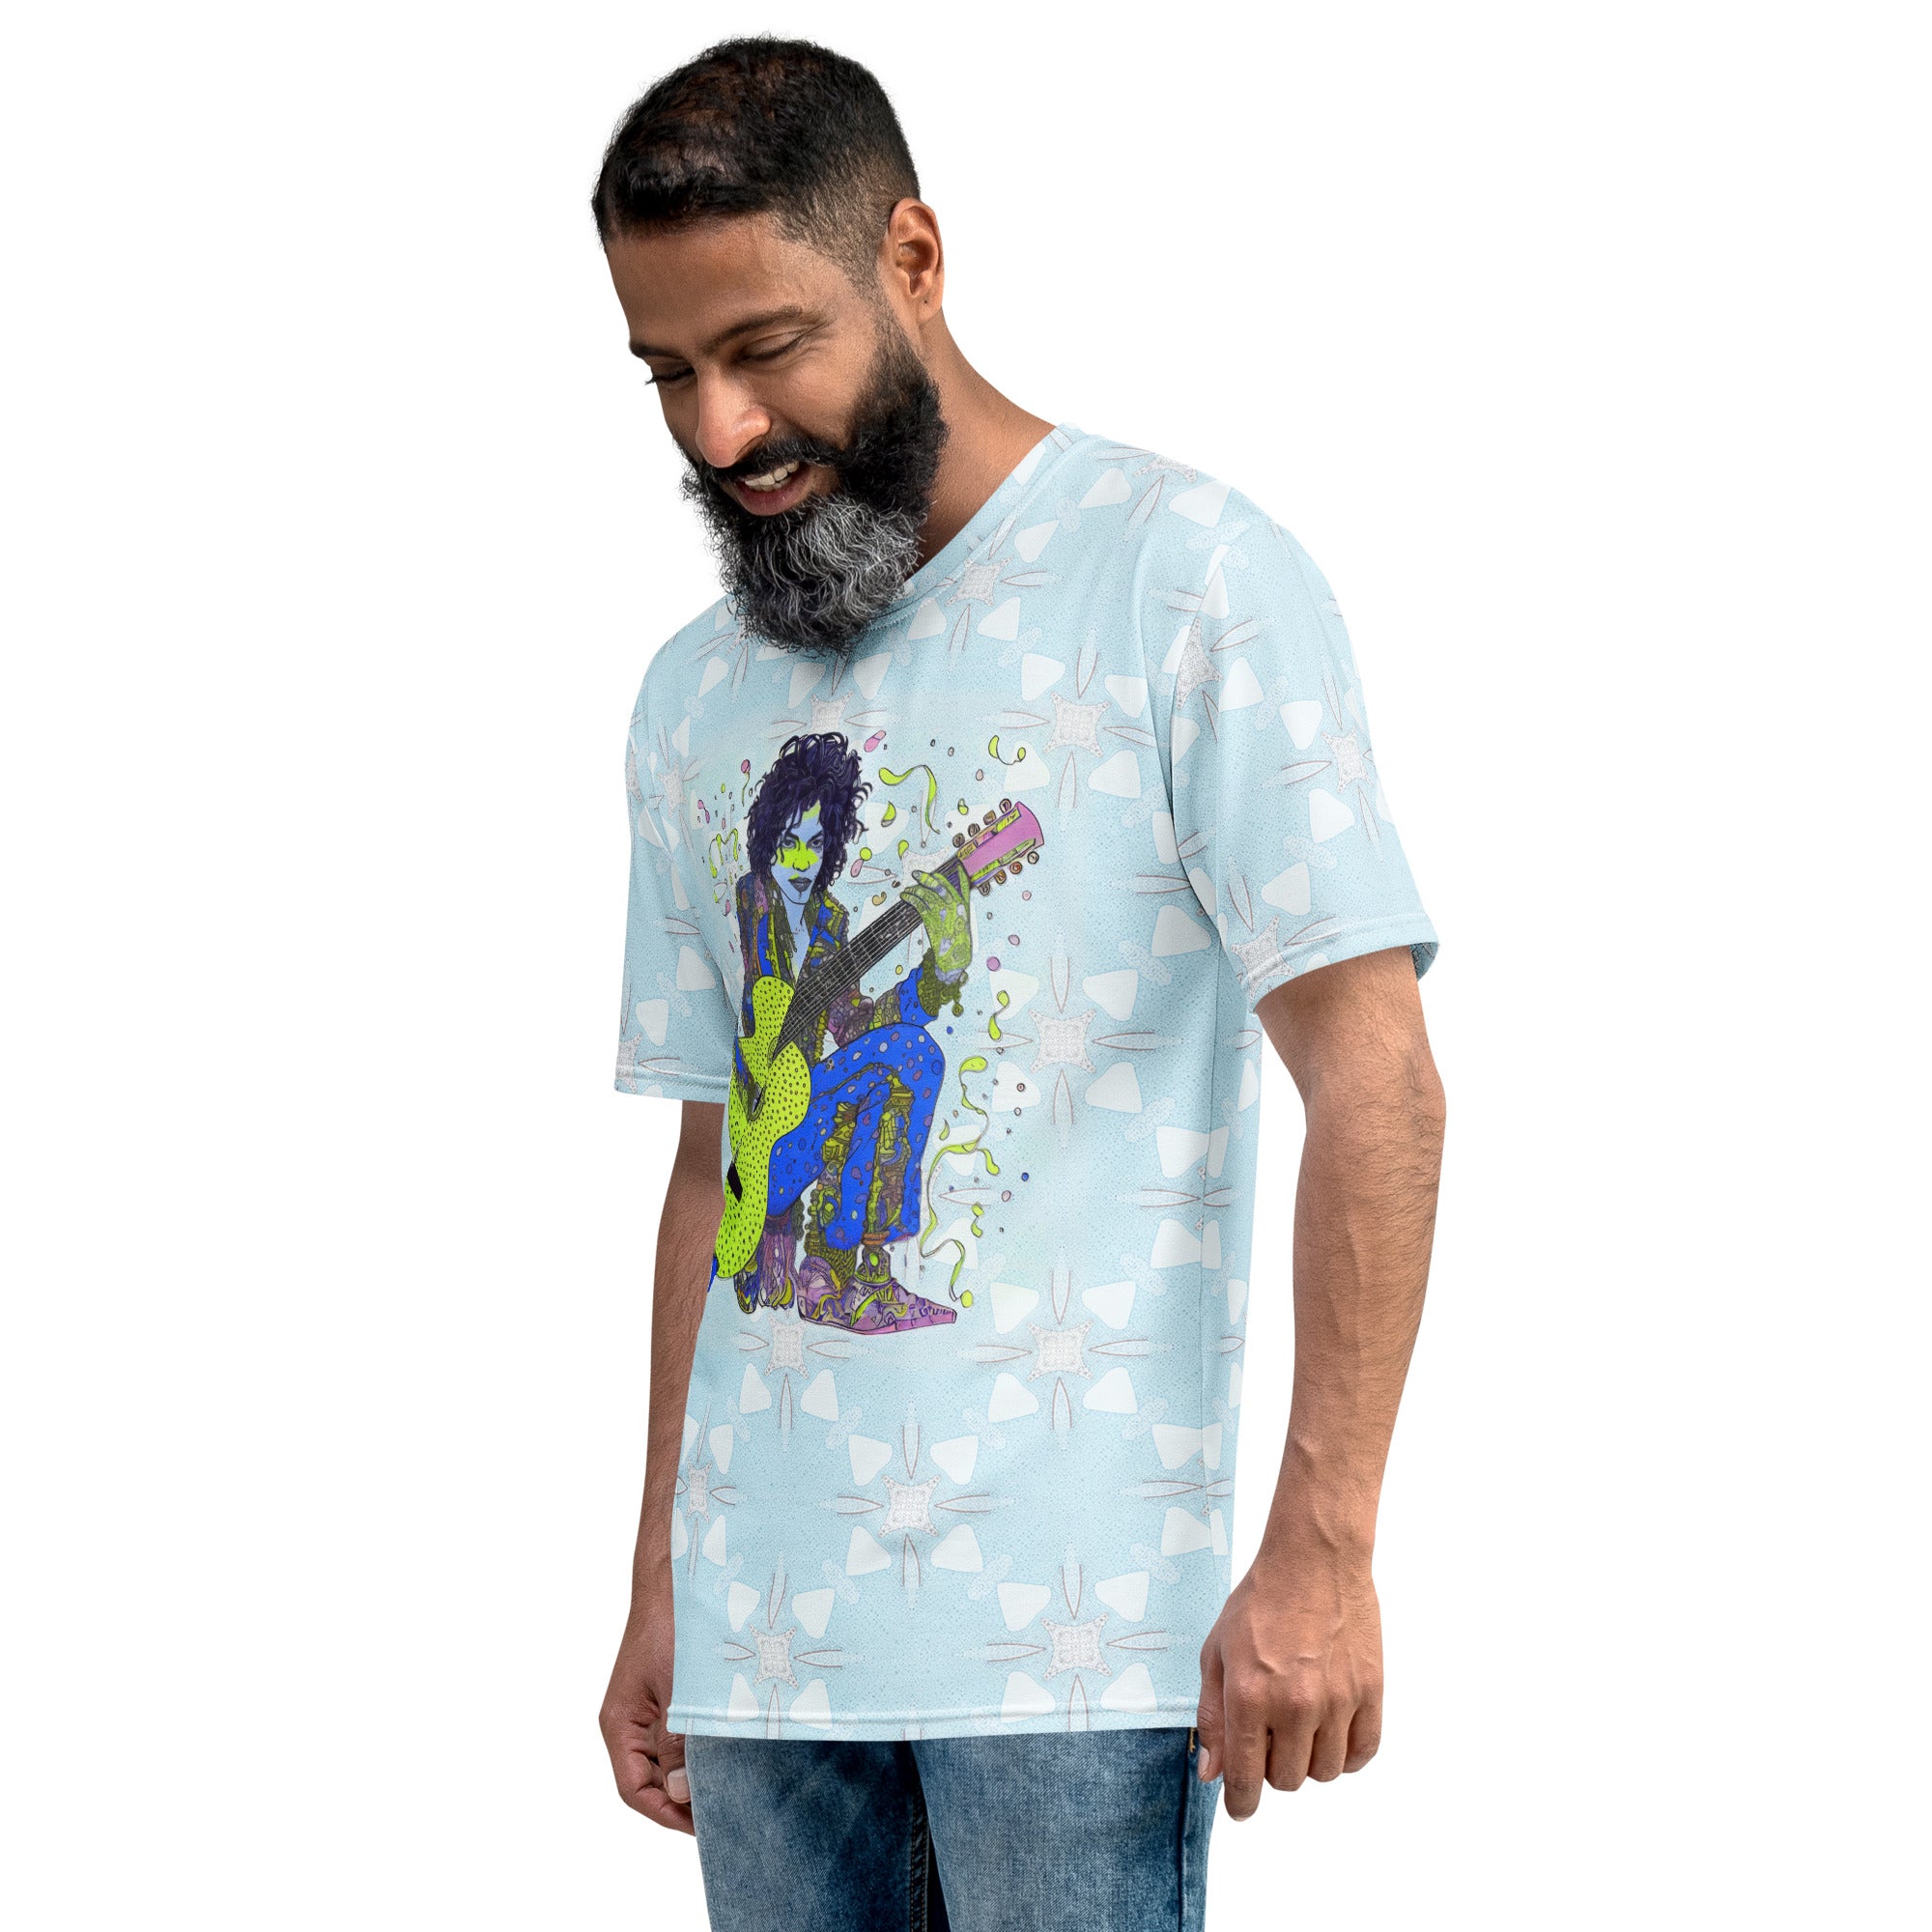 Side view of the Floral Fantasy Men's Crewneck Tee showcasing its fit.